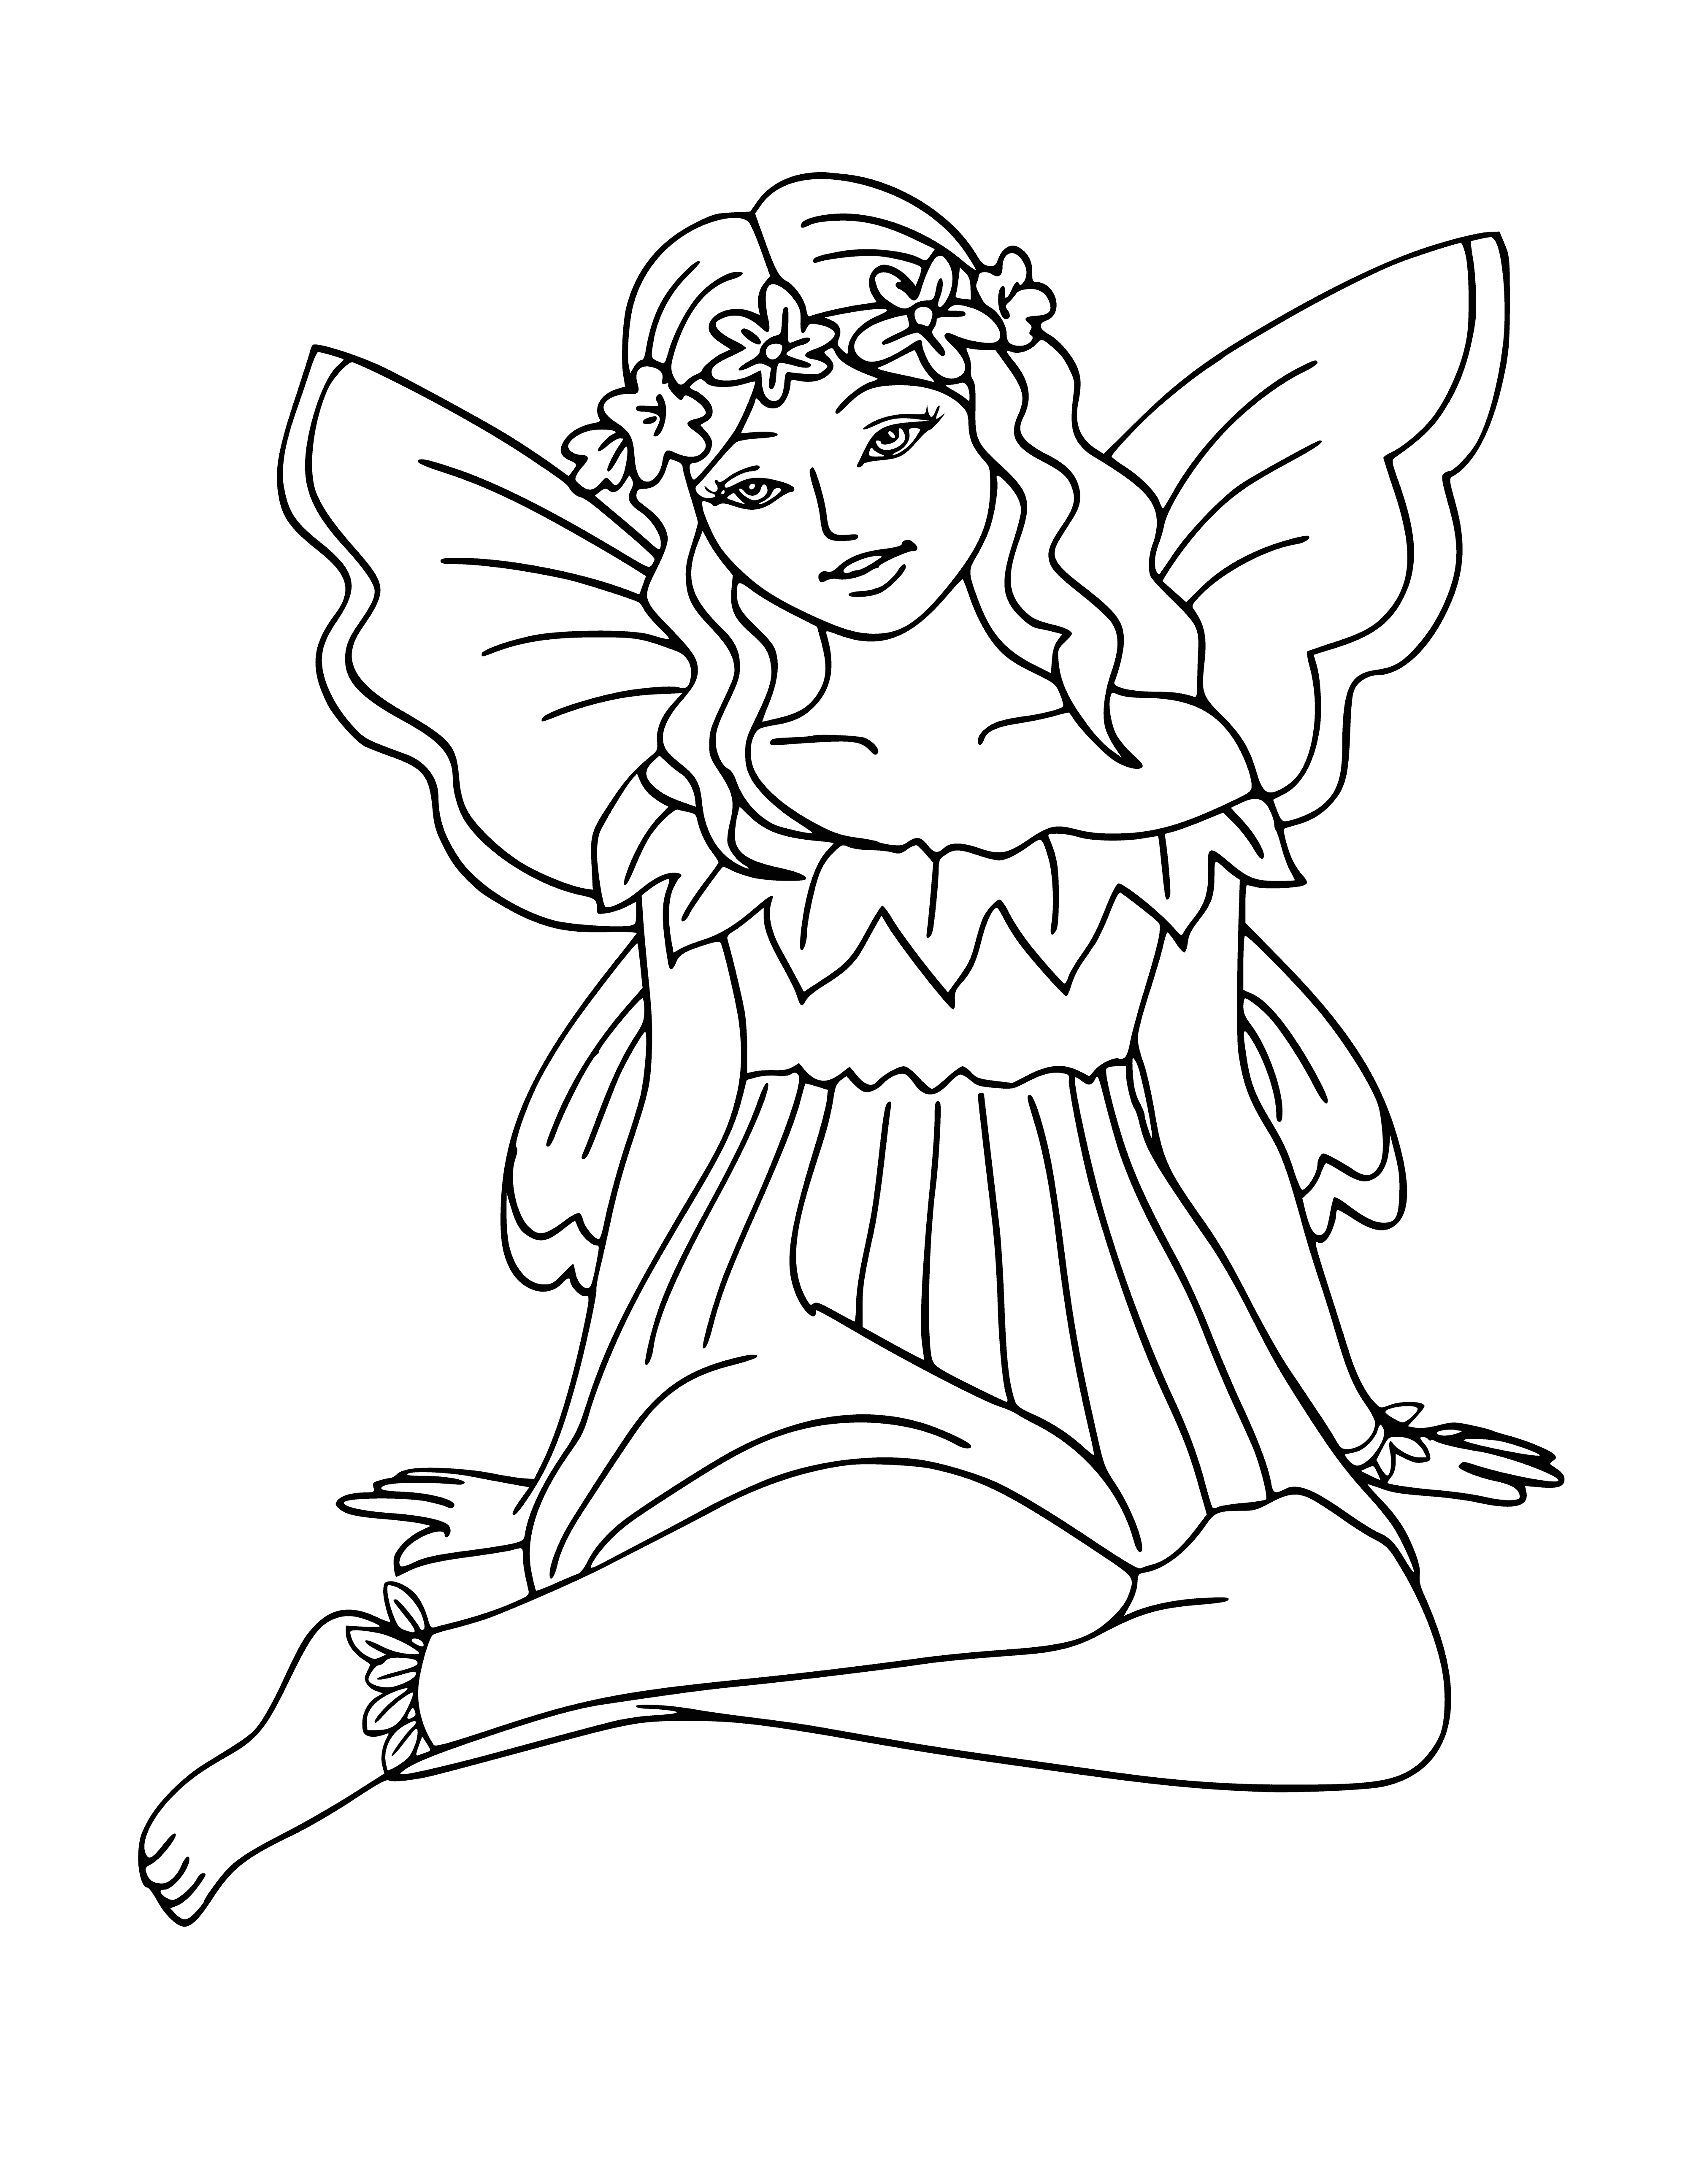 coloring page: Fairy sits in flower wreath, wings out & dressed in colorful dress.